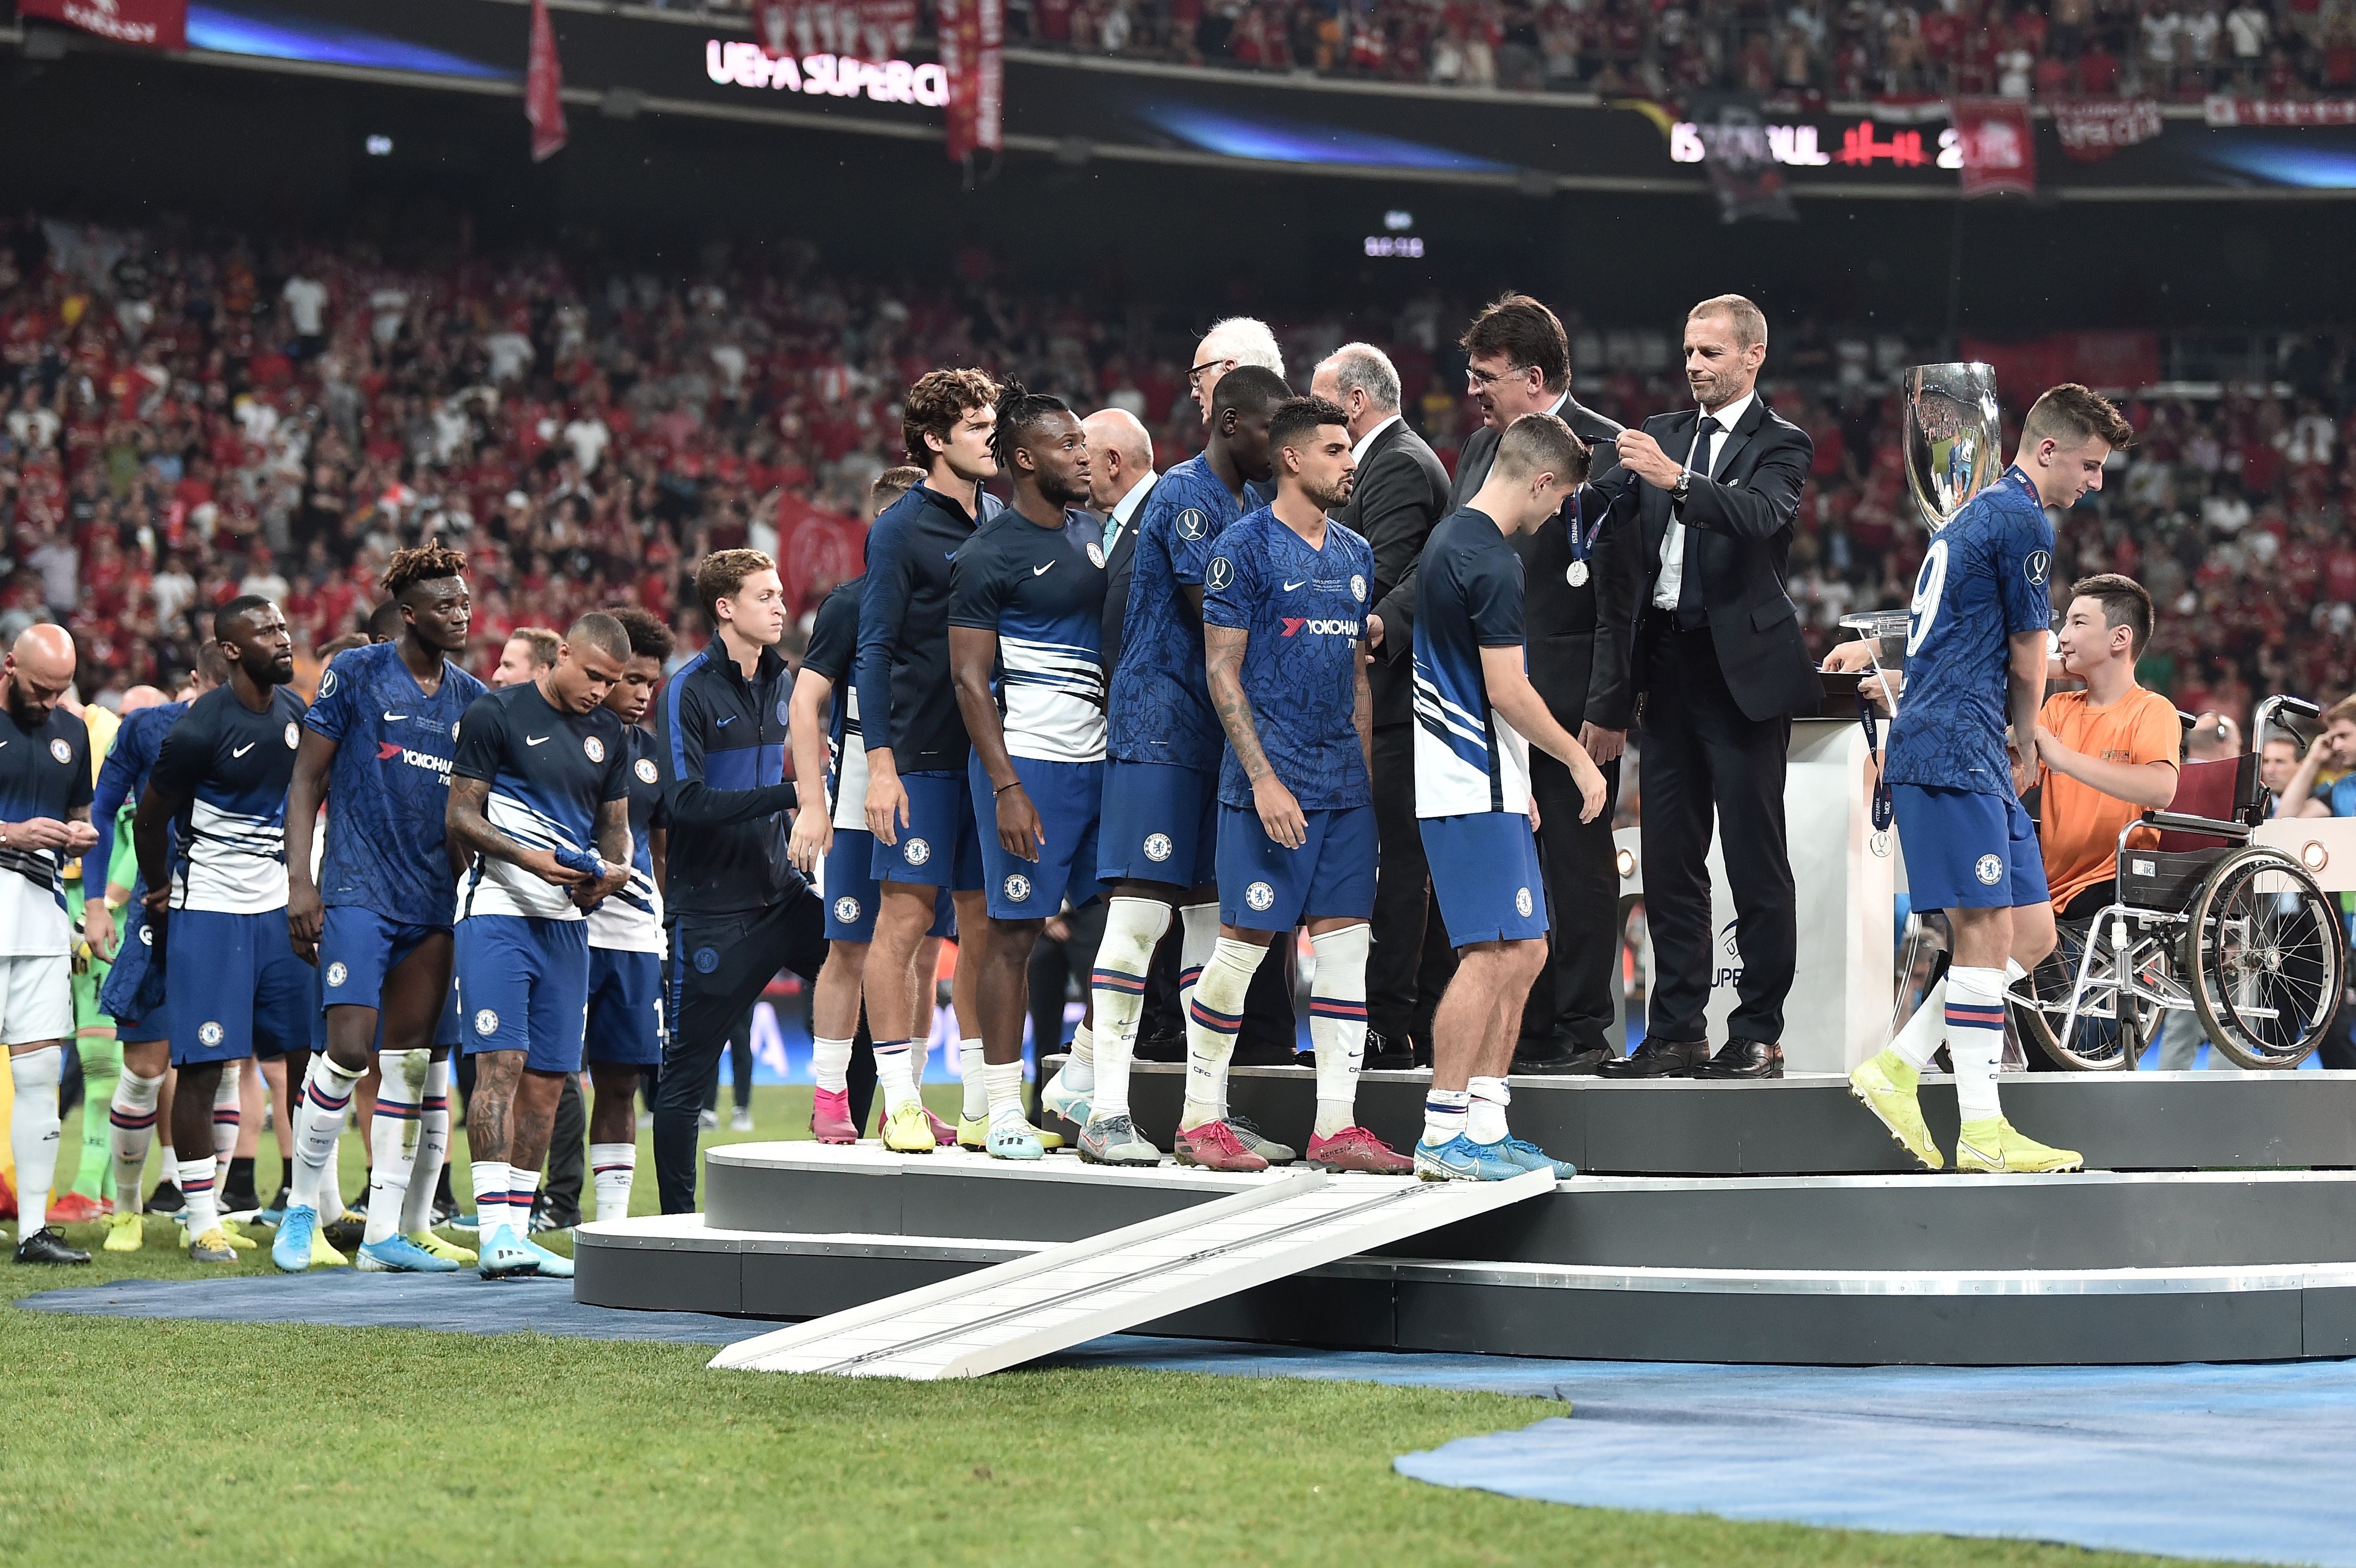 Chelsea players receive their medals after their defeat during the UEFA Super Cup 2019 football match between FC Liverpool and FC Chelsea at Besiktas Park Stadium in Istanbul on August 14, 2019. (Photo by OZAN KOSE / AFP)        (Photo credit should read OZAN KOSE/AFP/Getty Images)